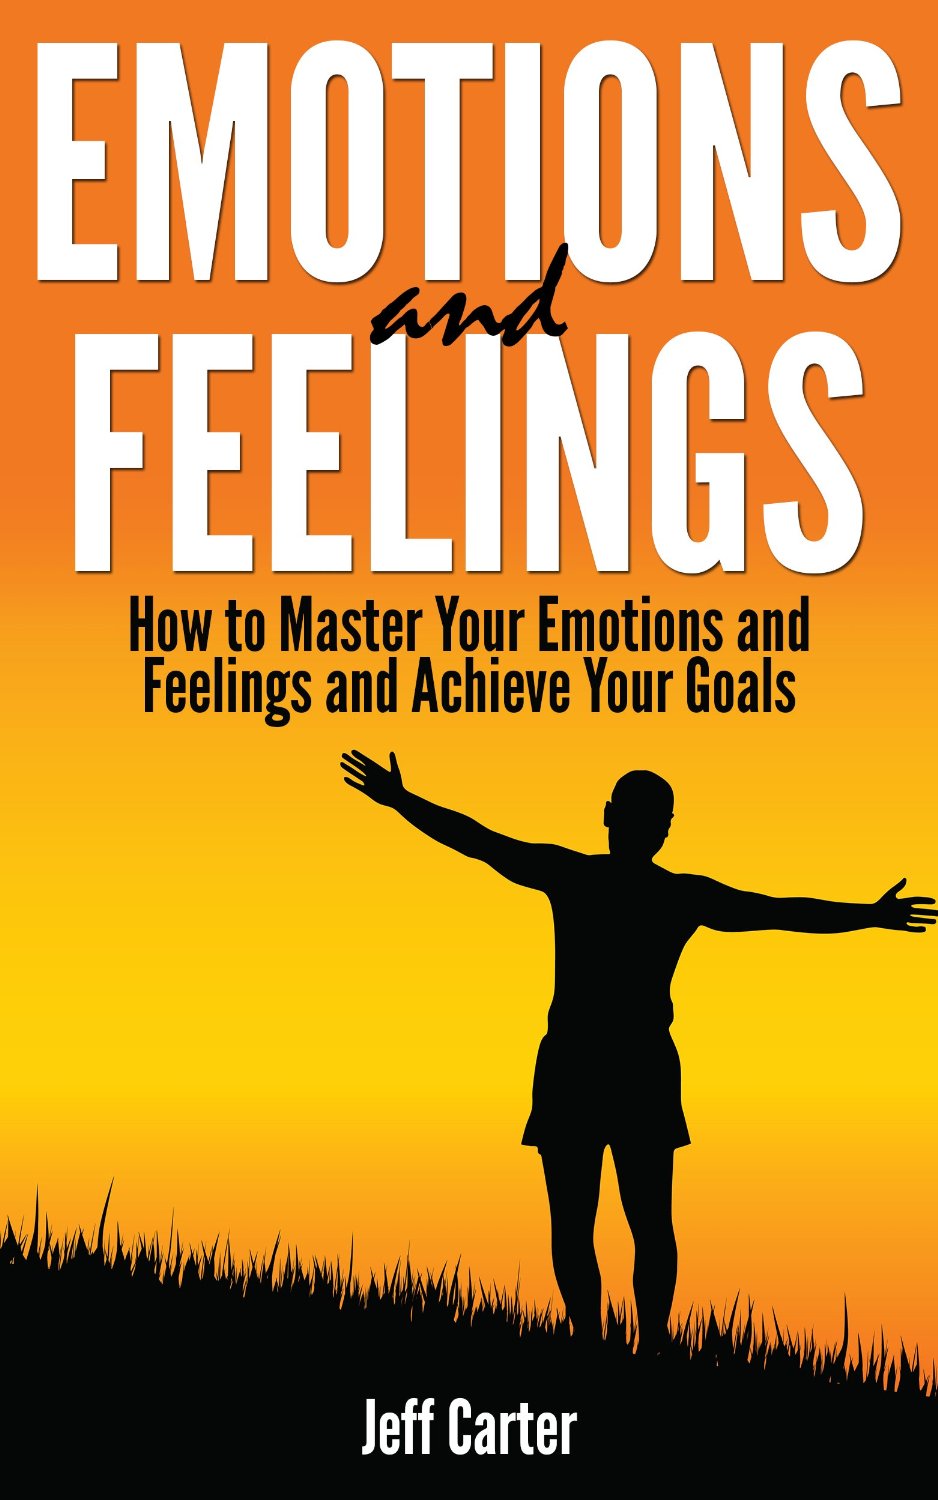 Emotions and Feelings by Jeff Carter